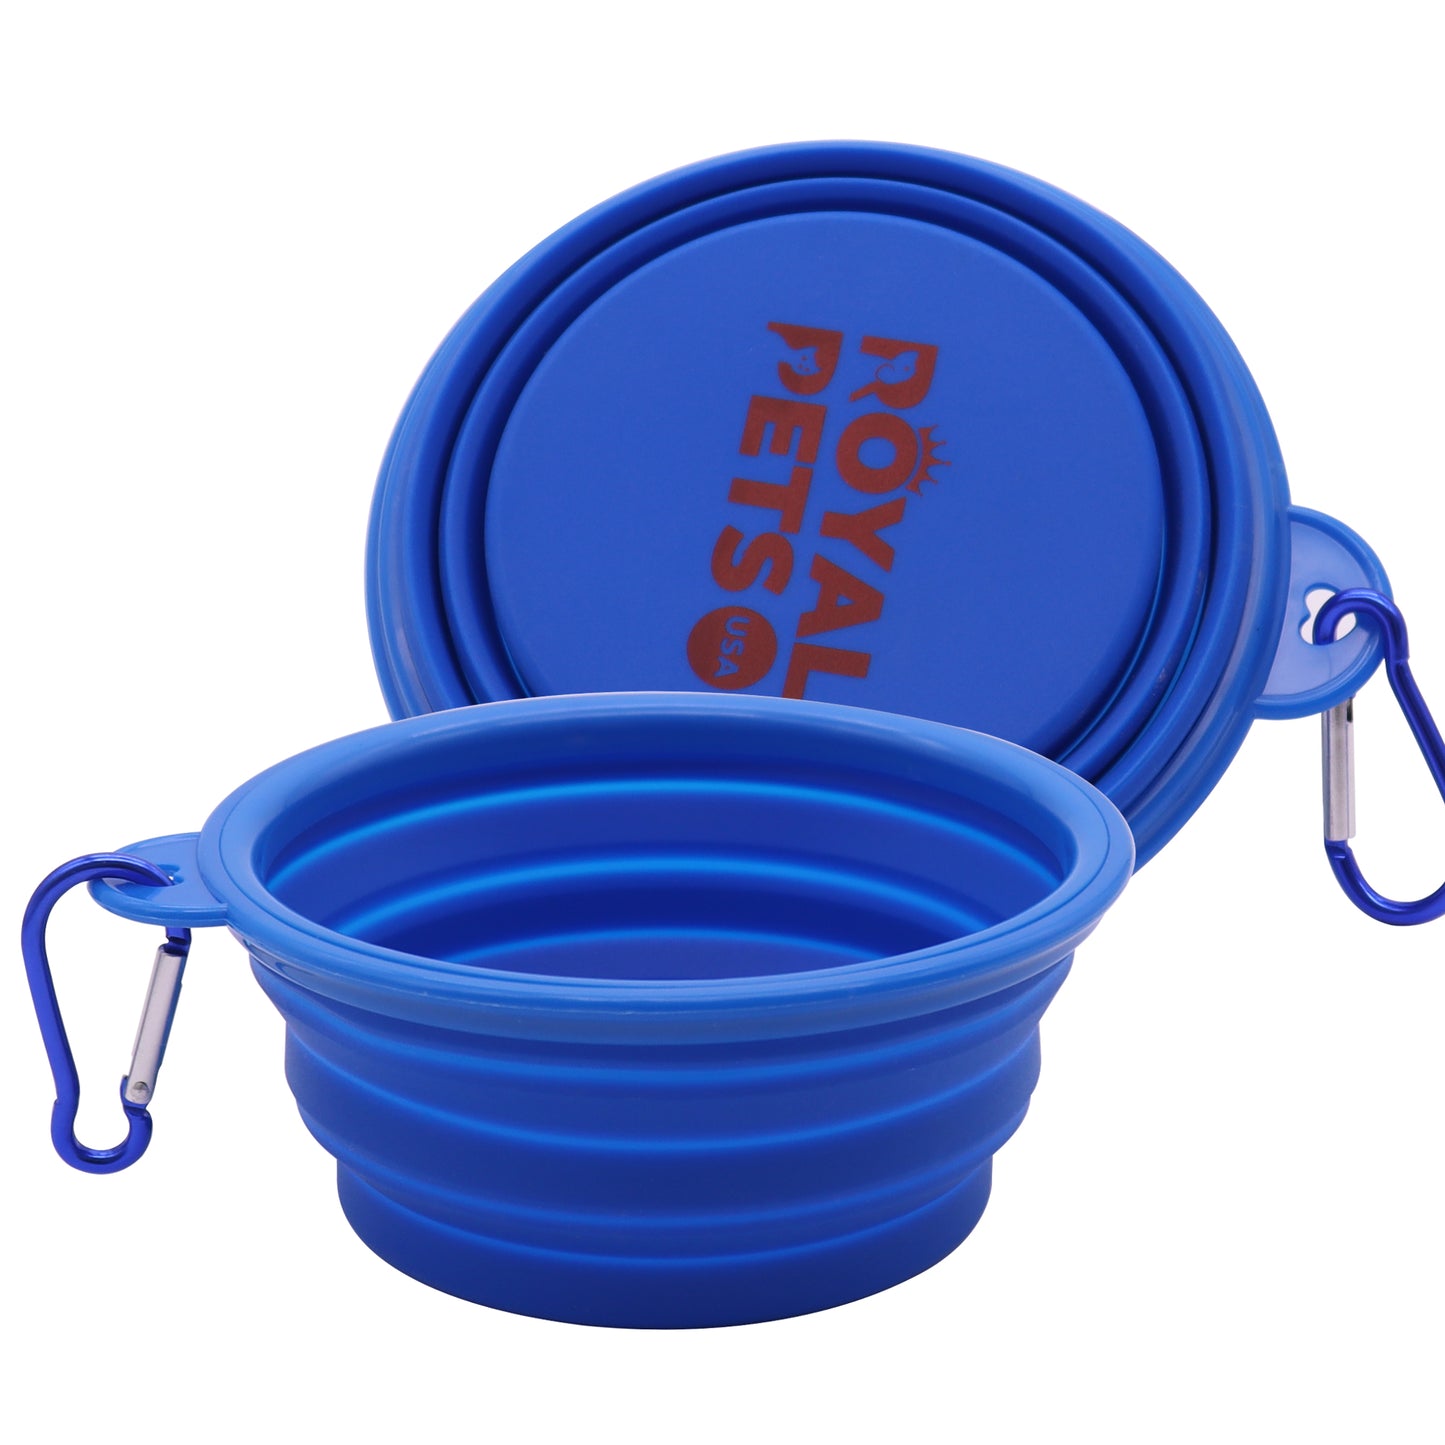 Royal Pets USA Collapsible Dog Travel Bowls, Portable Water Bowl for Dogs or Cats Pet Foldable Feeding Water or Treat for Traveling, Walking & Camping with Carabiner, BPA Free  650ml